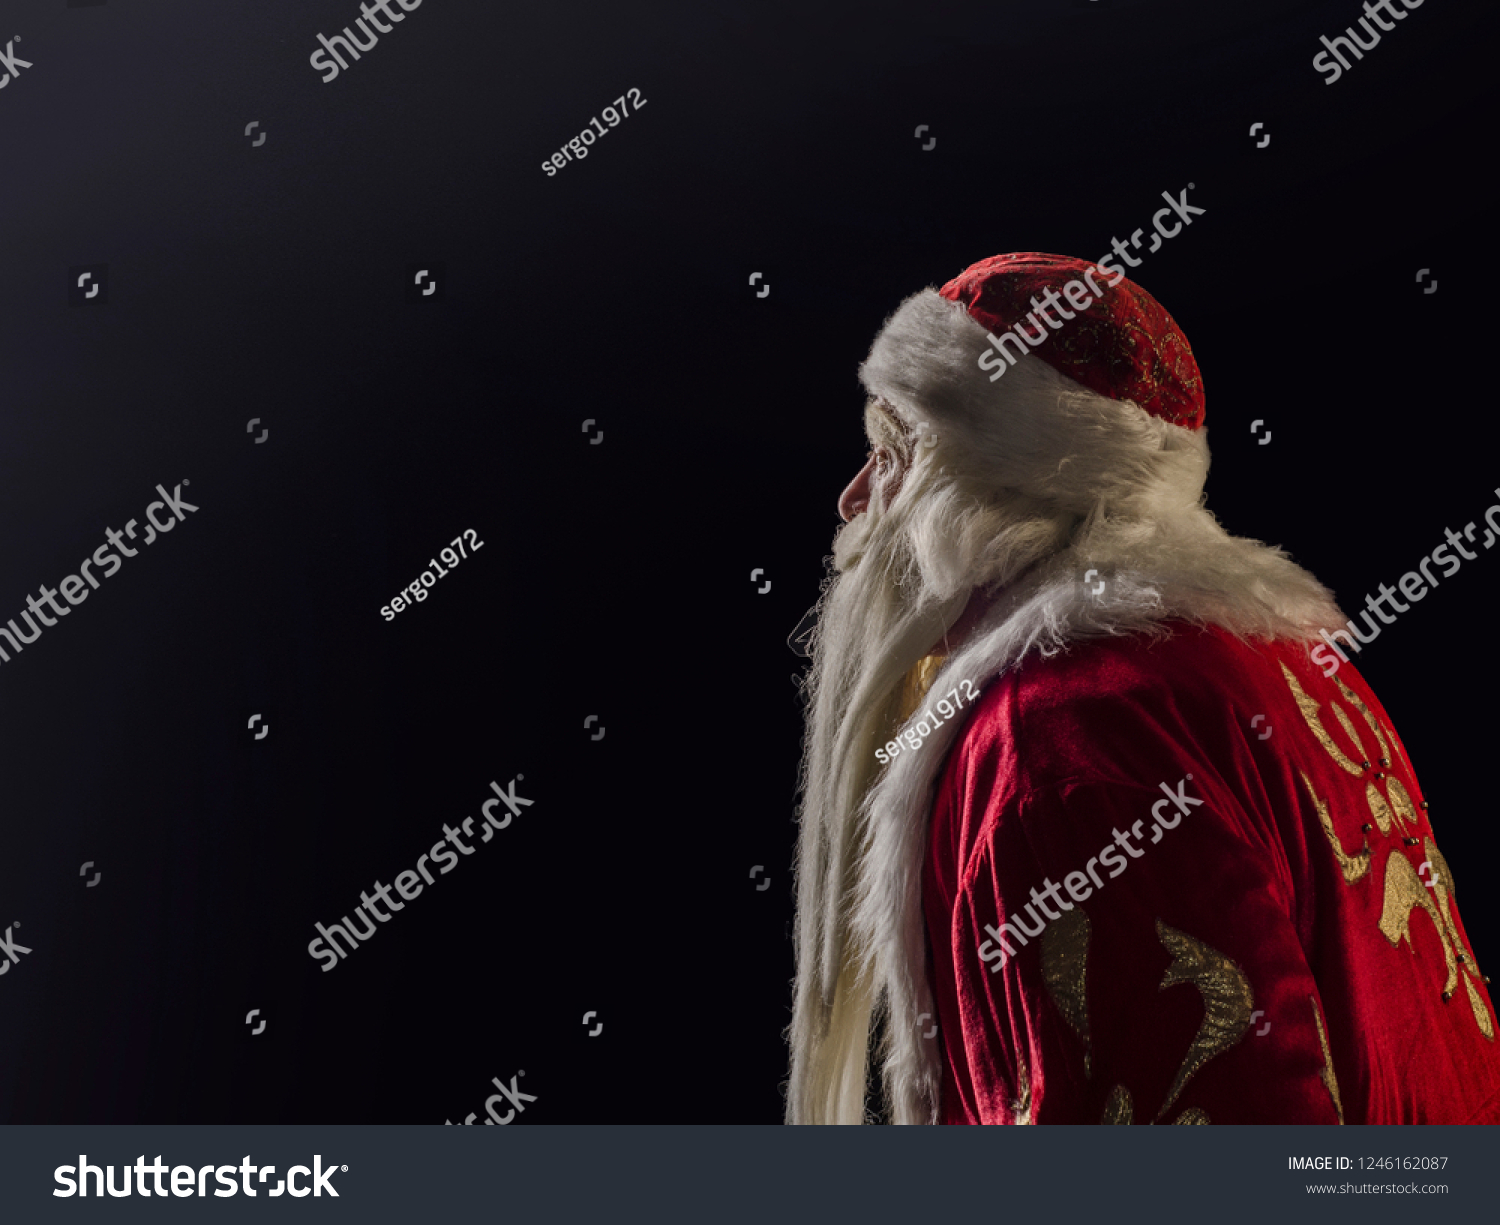 Santa Claus and Santa Claus on a black background. Santa Claus and Santa Claus majestic, looks away, in profile against a black background. #1246162087